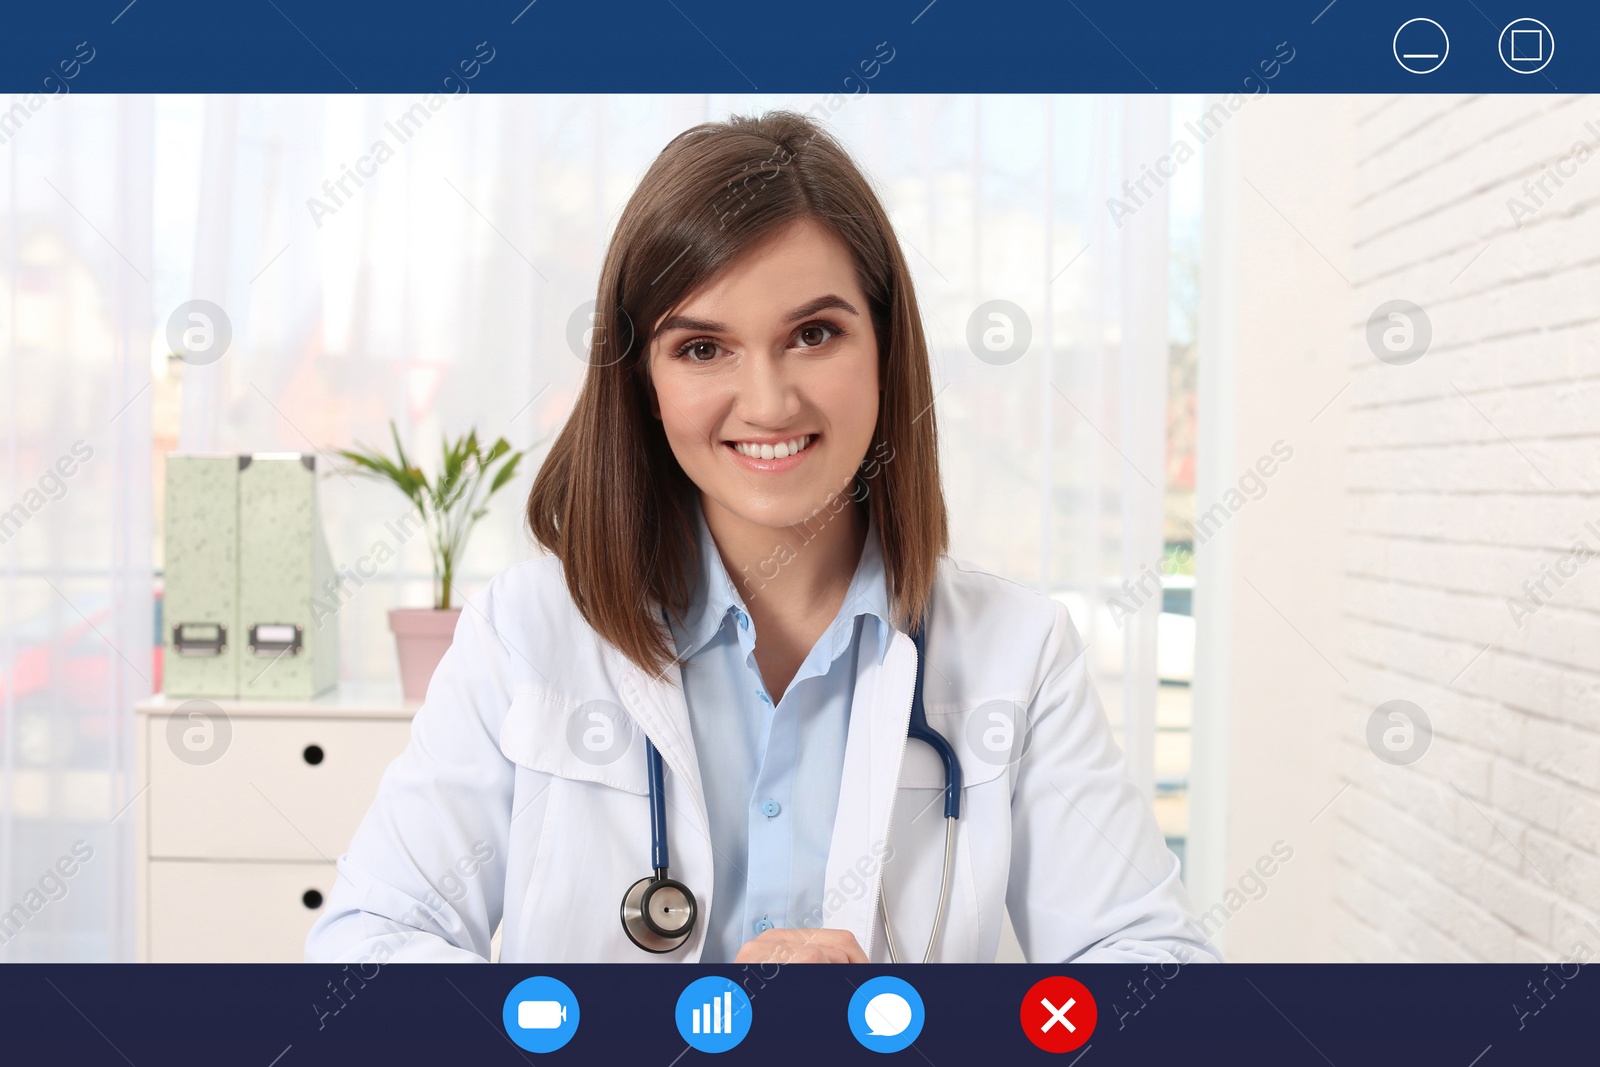 Image of Pediatrician consulting patient online using video chat in clinic, view from webcam